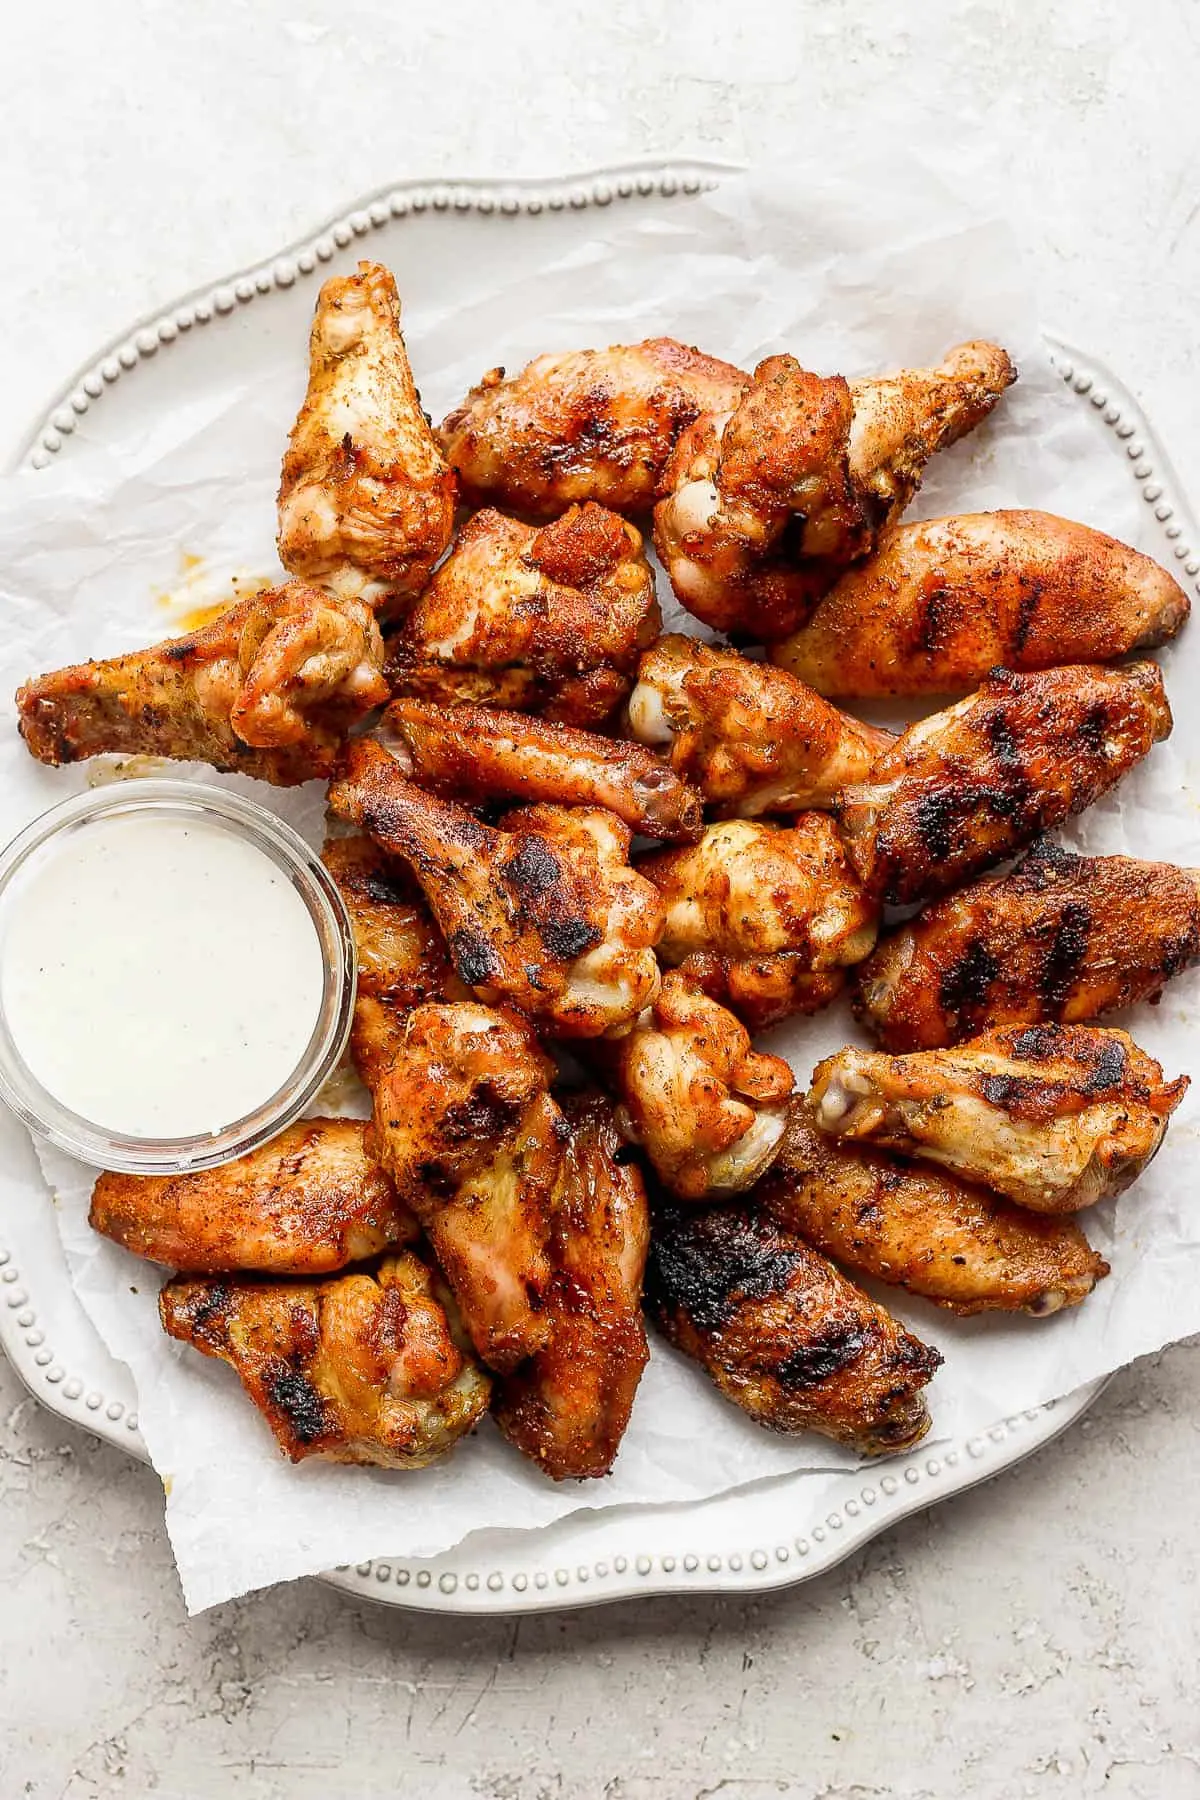 smoked chicken wings marinade - How long can you marinate chicken wings